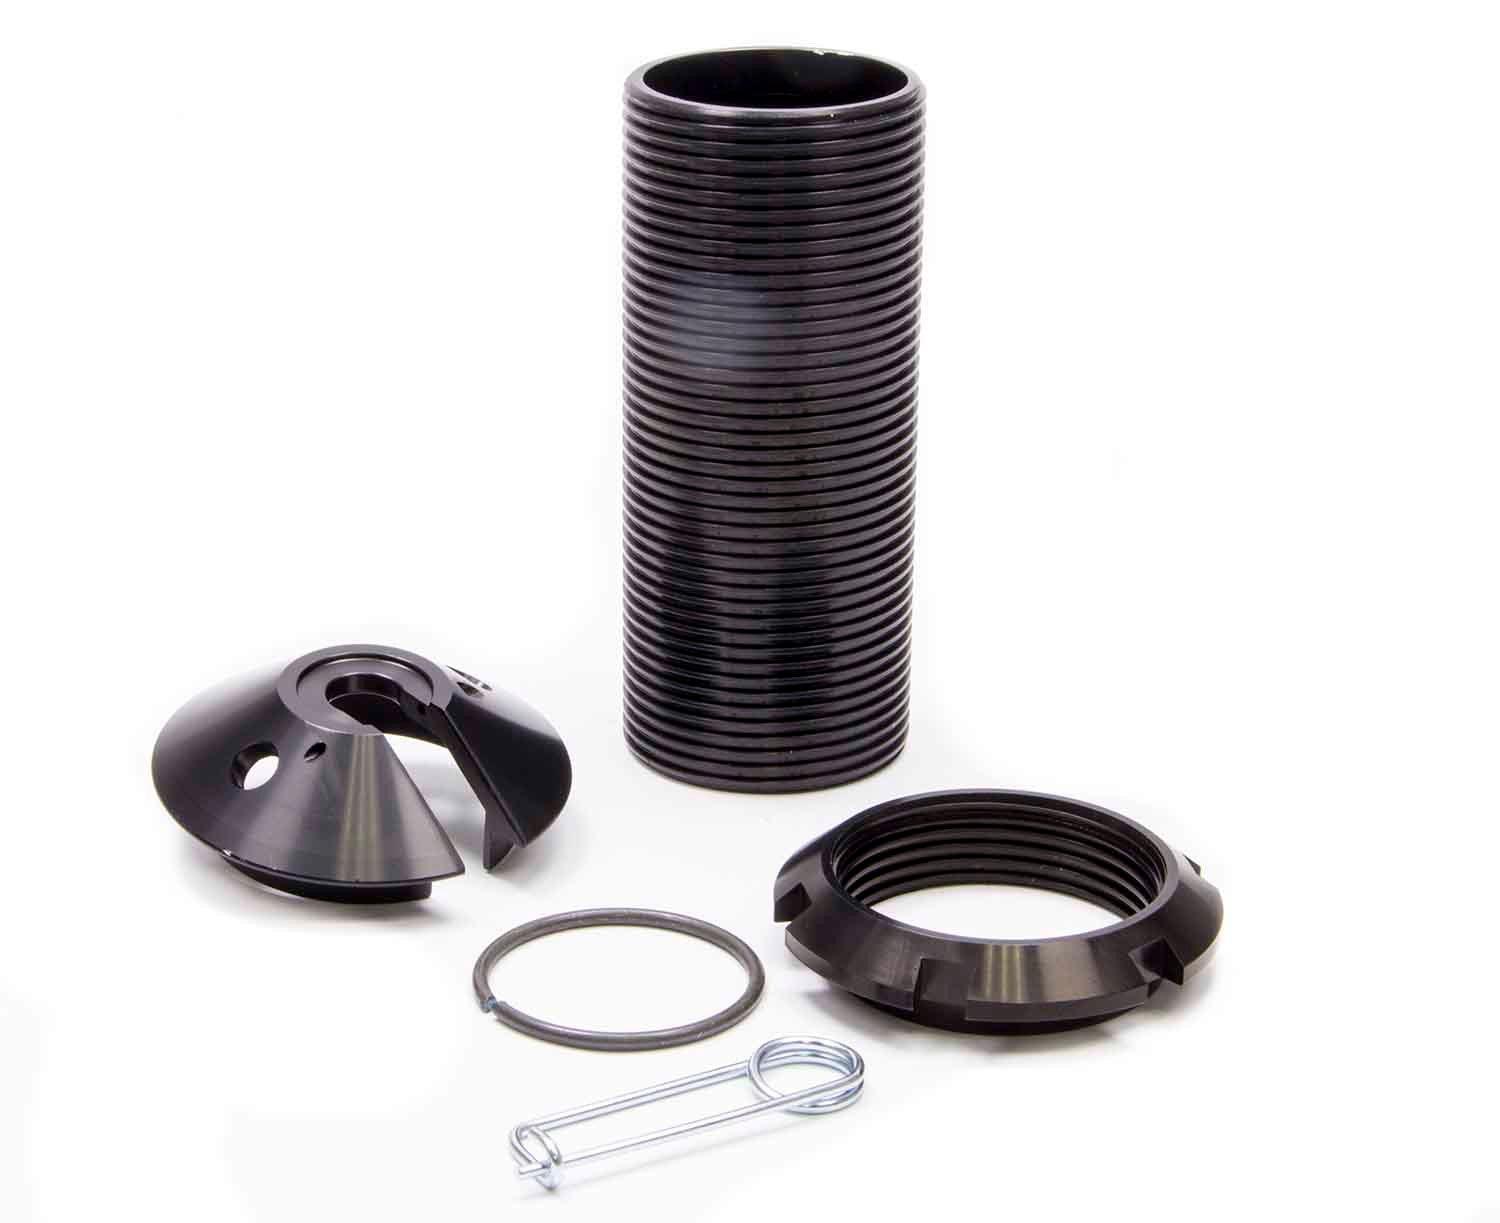 Aluminum Coil-Over Kit - Burlile Performance Products